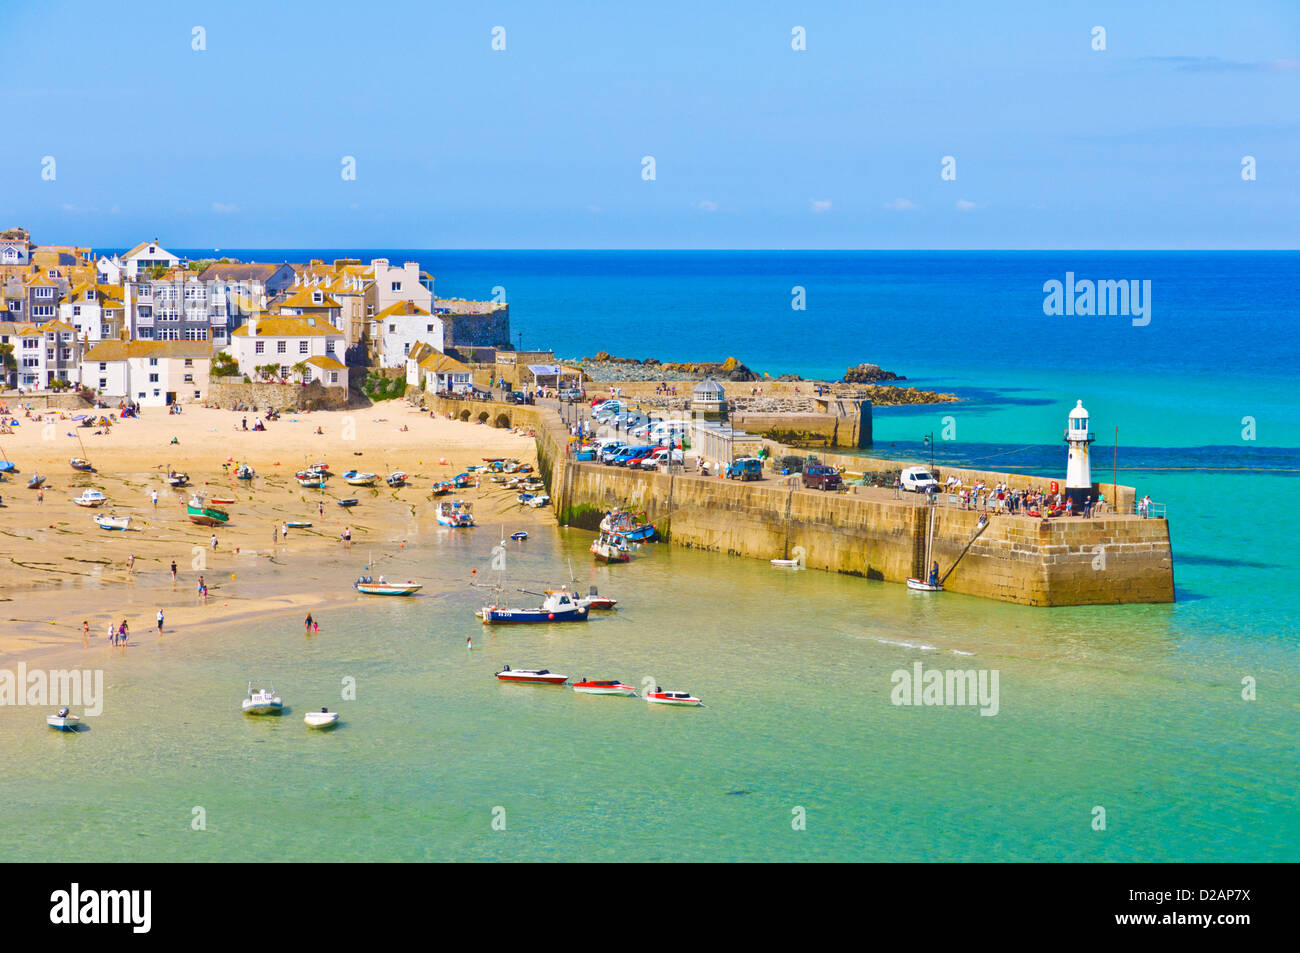 St Ives Cornwall Holidaymakers on the beach at The Island or St Ives Head St Ives Cornwall England GB UK Europe Stock Photo